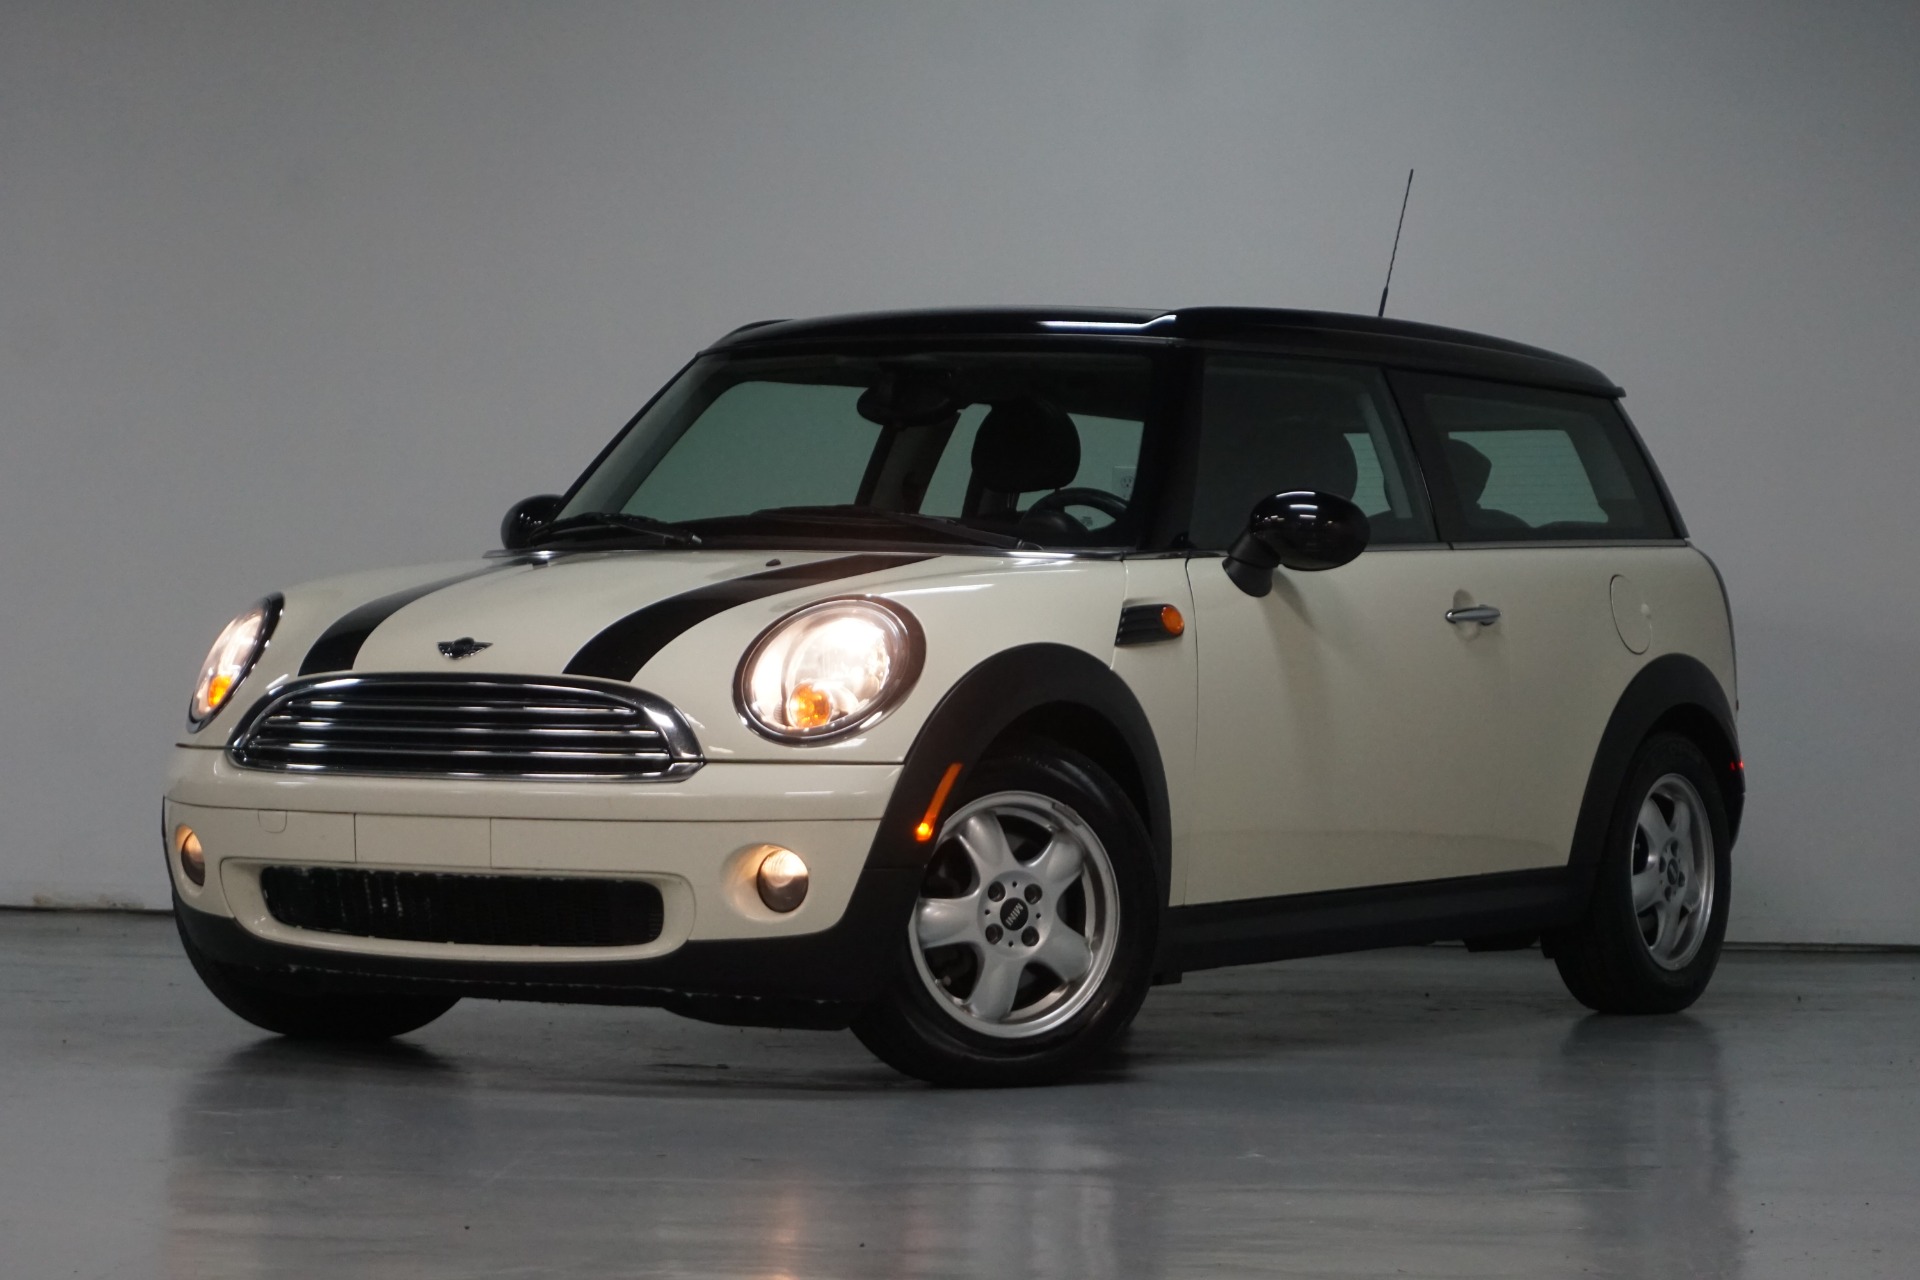 Used 2009 Pepper White MINI Cooper Clubman 2 Door Coupe For Sale (Sold) |  Prime Motorz Stock #2611